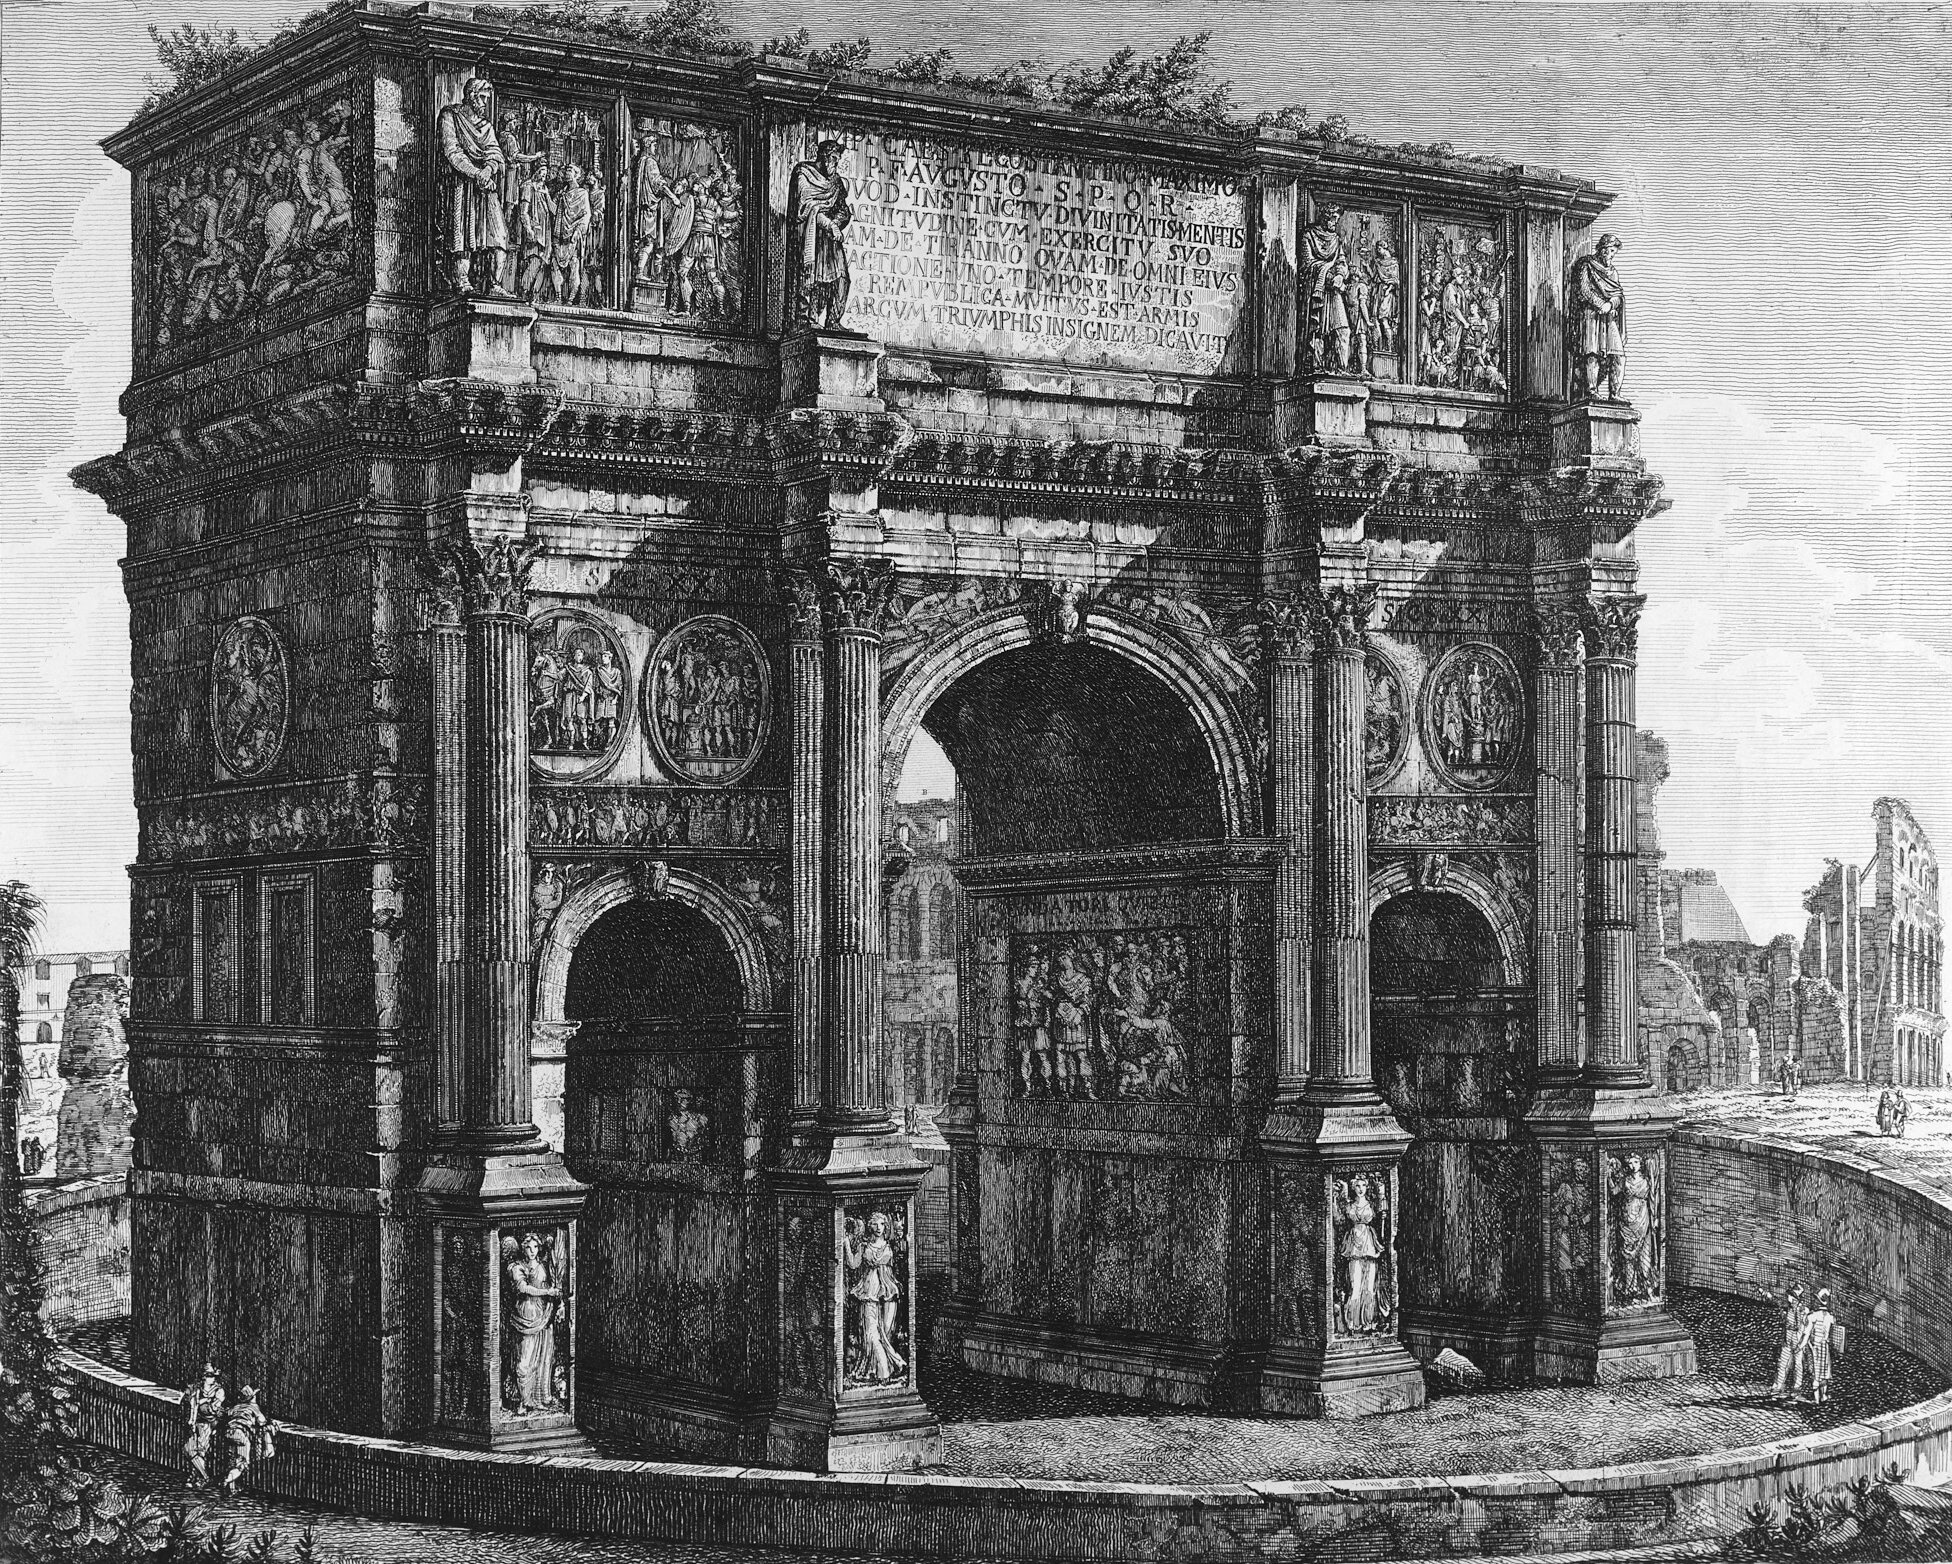   Luigi Rossini (1790-1857)  View of the Arch of Constantine   Etching, 1822 The Noble Maritime Collection  Gift of Barnett Shepherd  